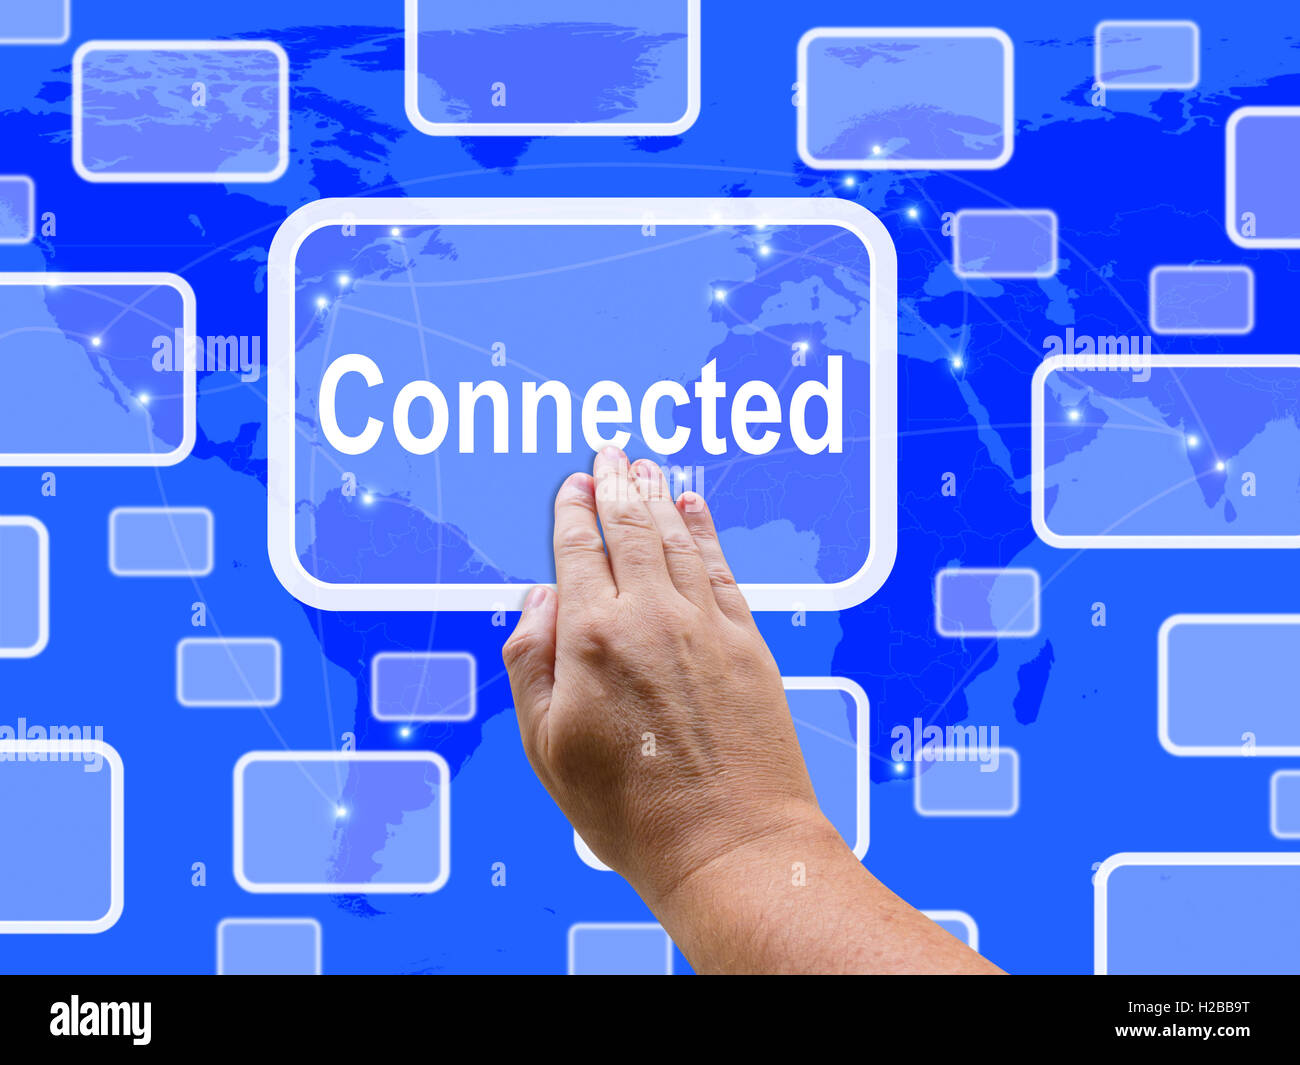 Connected Touch Screen  Shows Communications And Connections Stock Photo